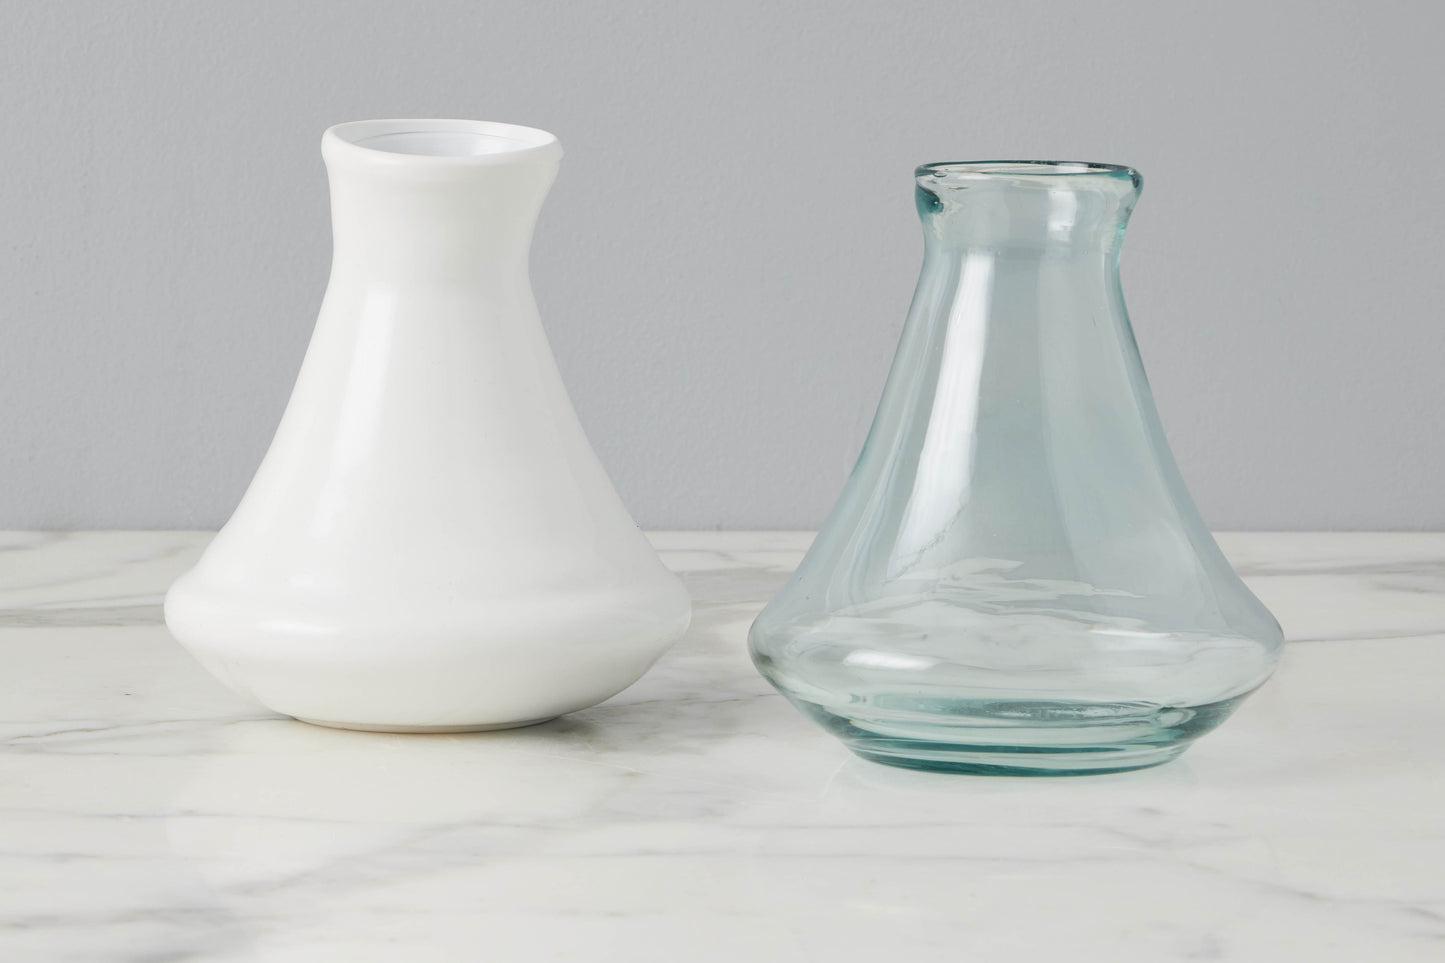 Small Glass Vase